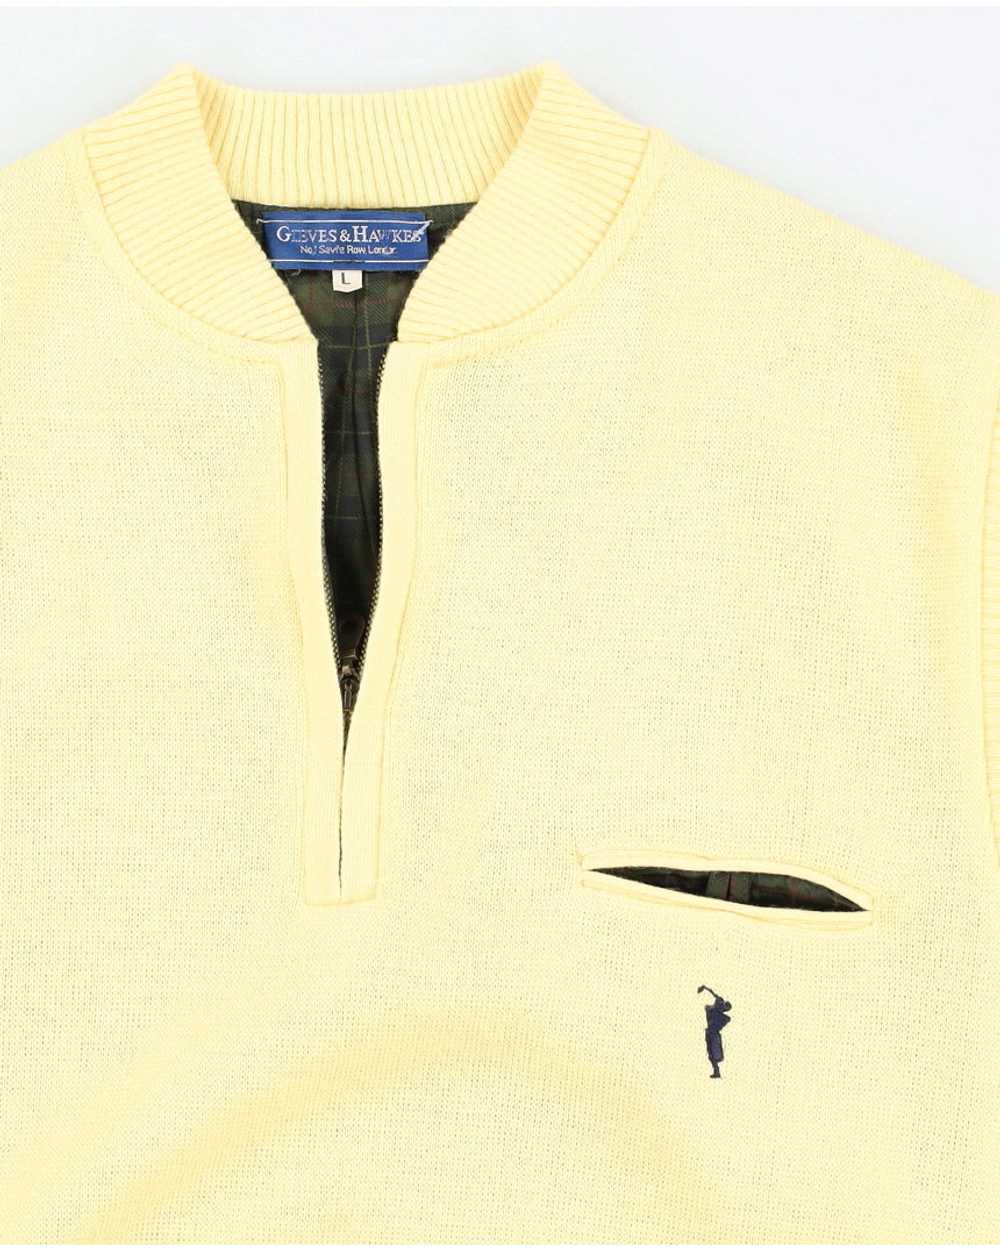 Gieves and Hawkes Yellow Golf Sweater Vest - L - image 3